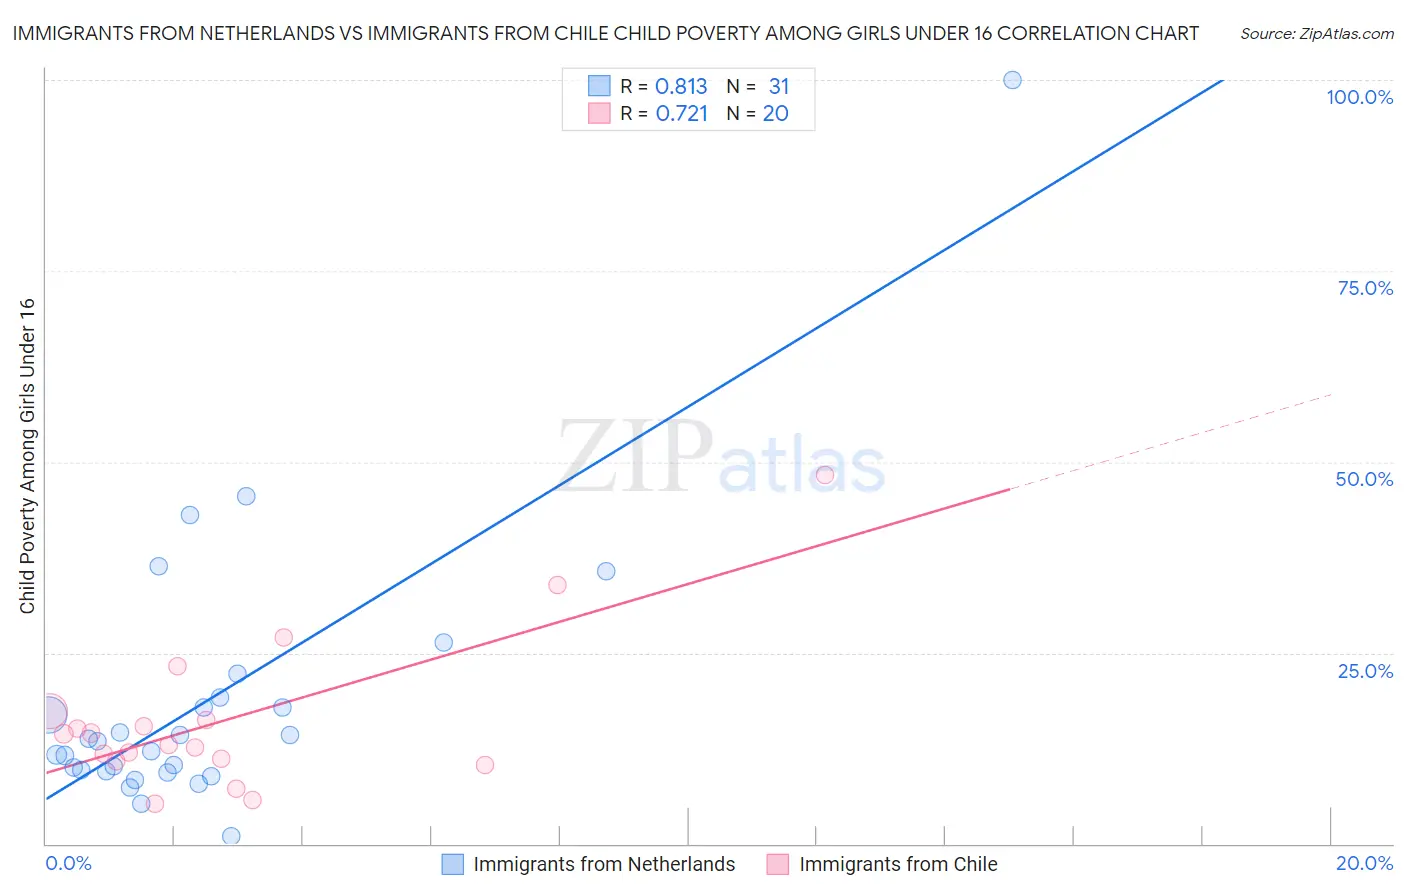 Immigrants from Netherlands vs Immigrants from Chile Child Poverty Among Girls Under 16